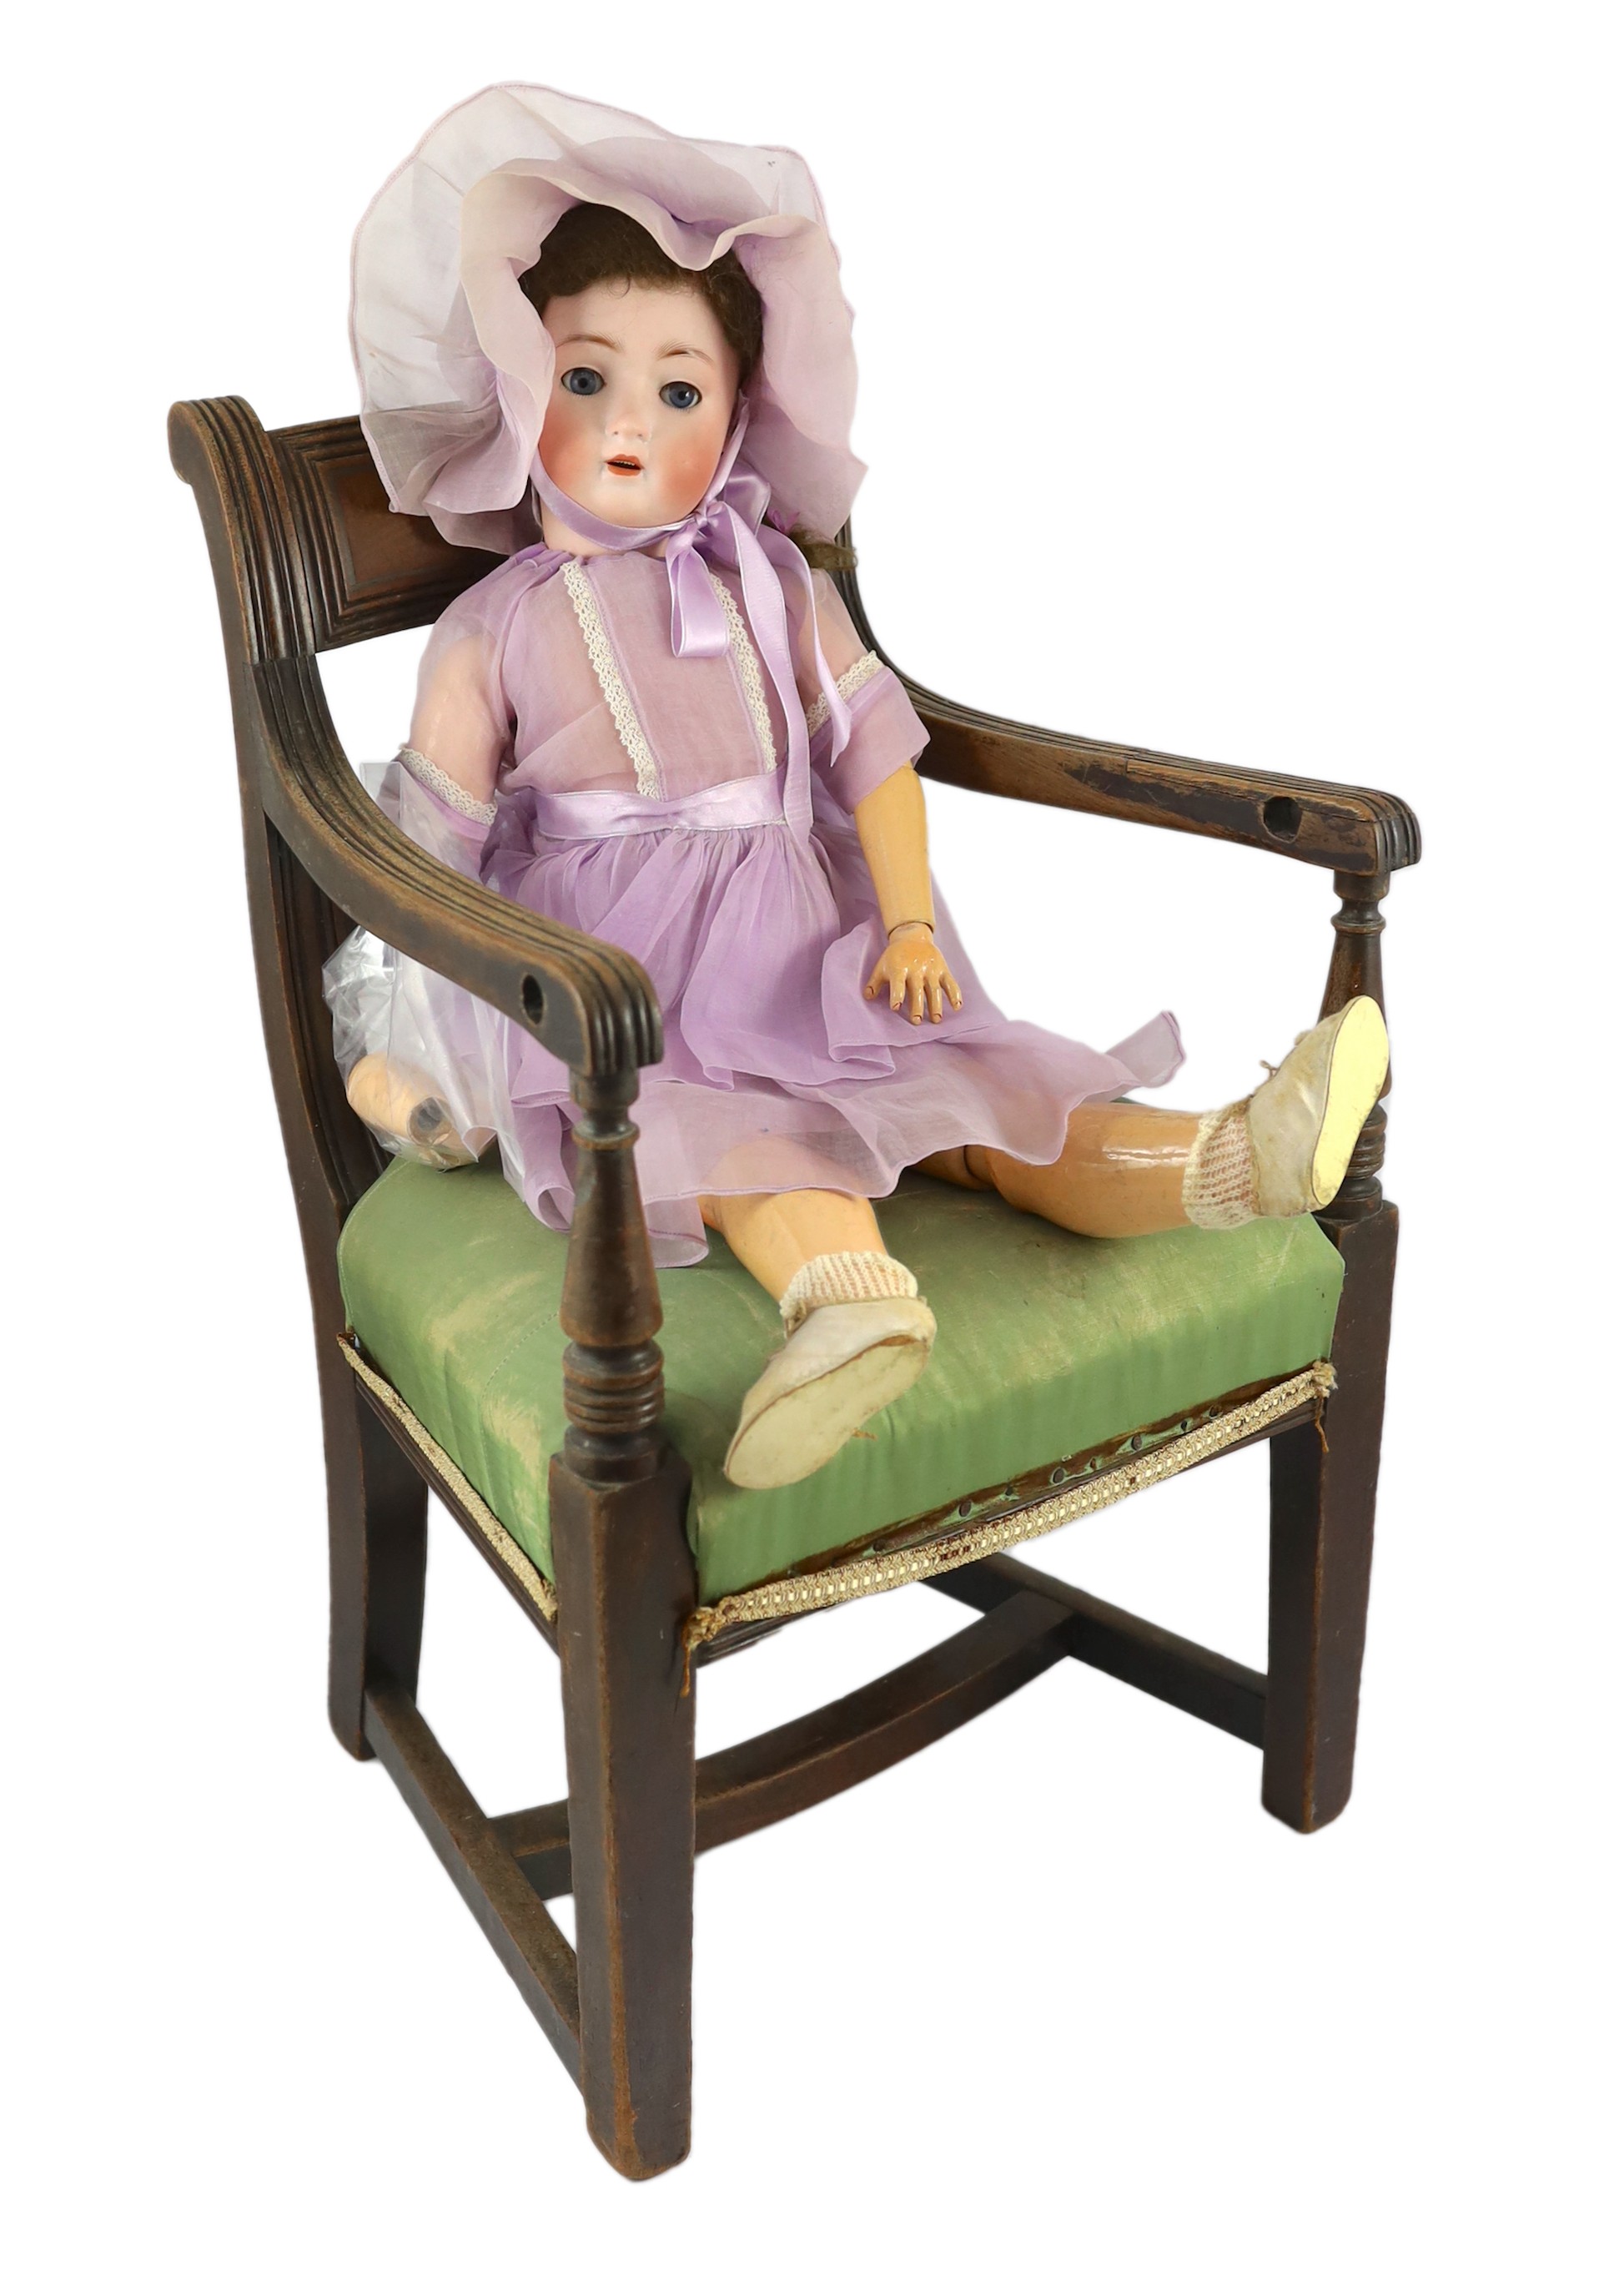 An Alt, Beck & Gottschalck bisque doll, German, circa 1912, 23in. Please note the chair is for display purposes only.                                                                                                       